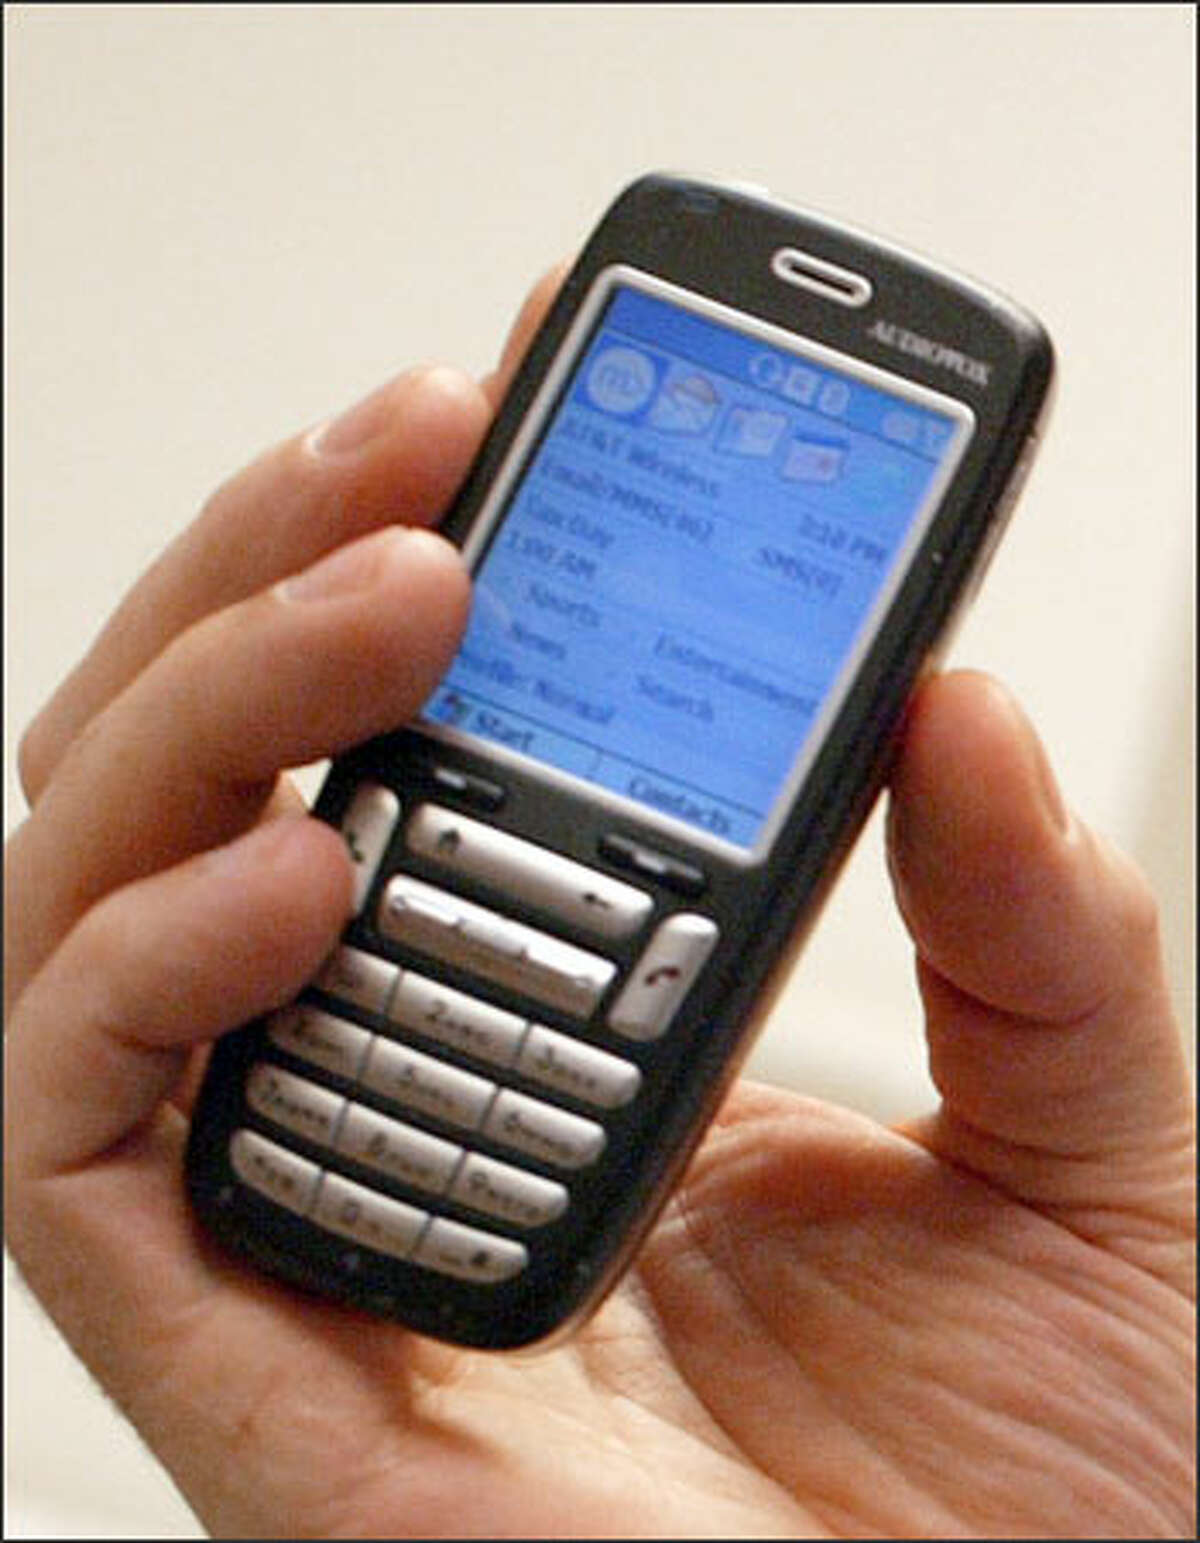 Don Etsekson's "smart phone" downloaded thousands of kilobytes of data because of a default setting